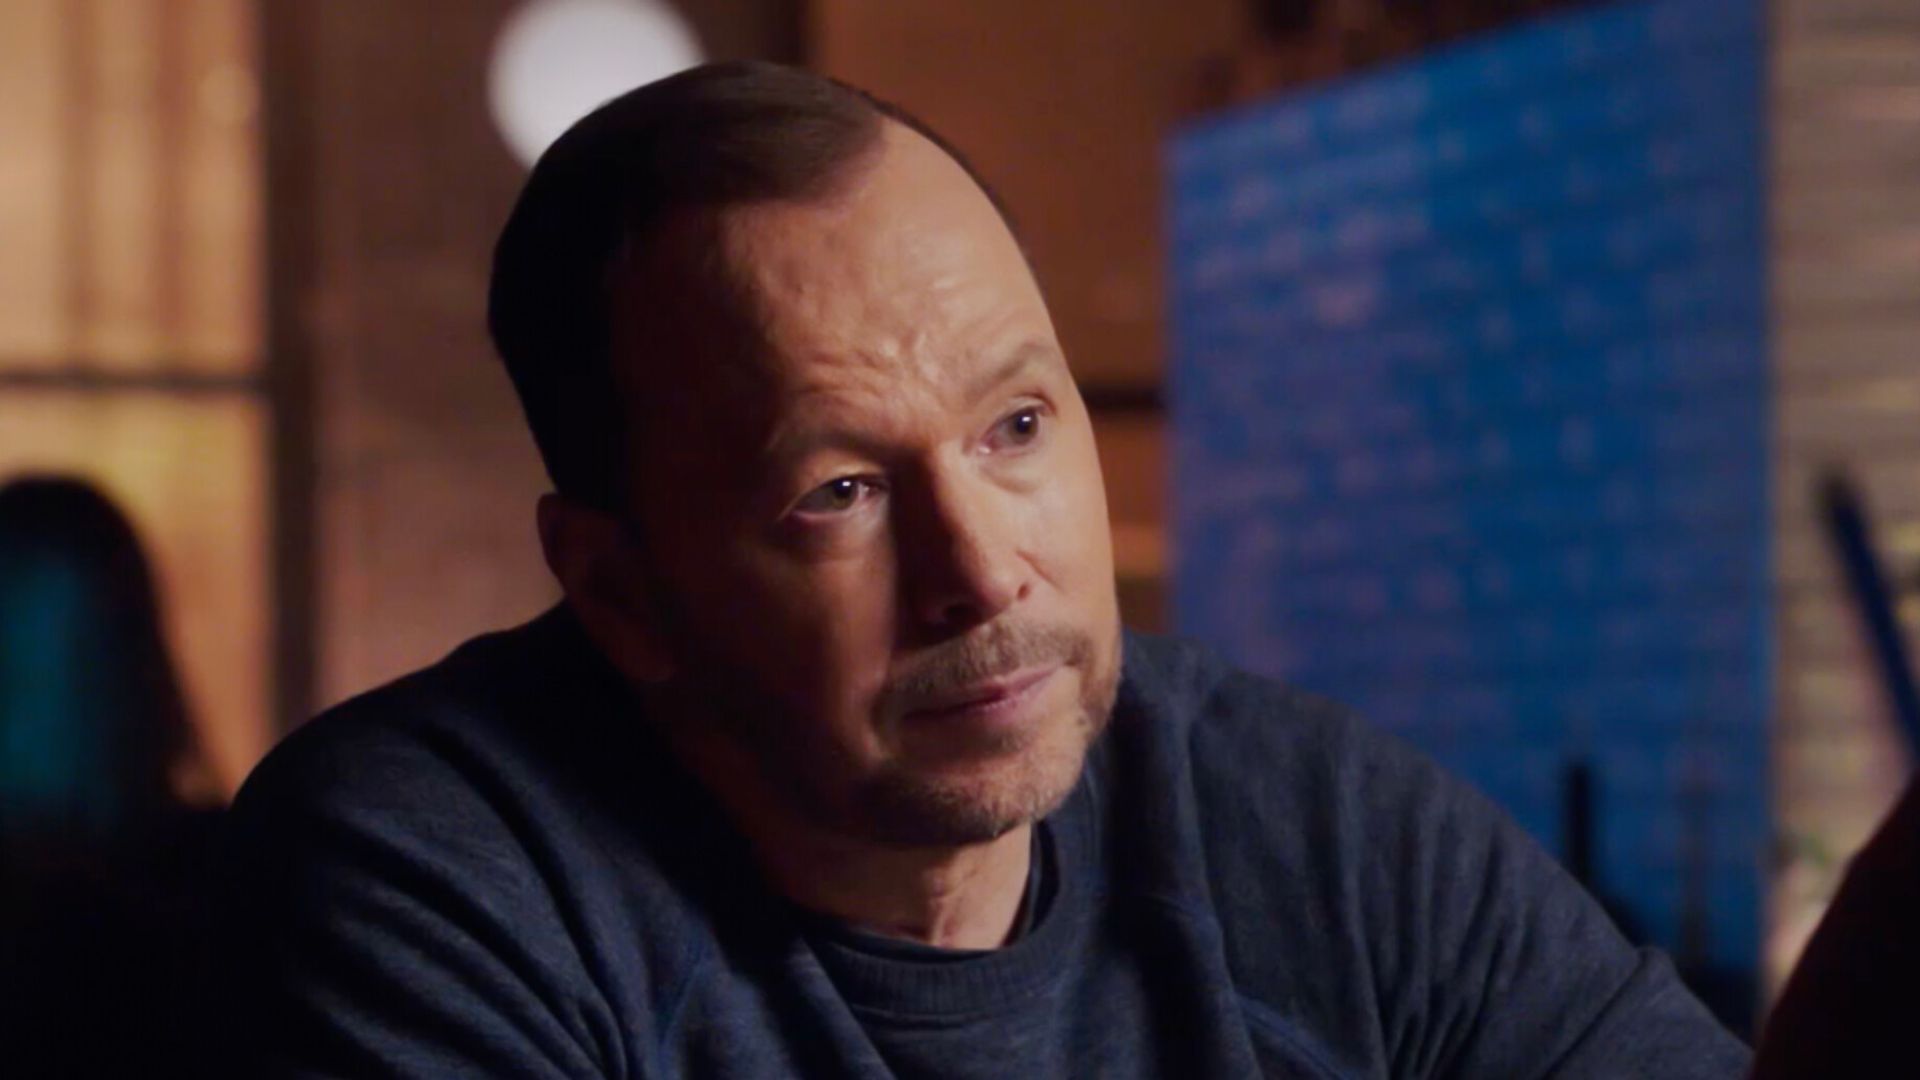 Donnie Wahlberg gets into a fight as CBS teases Blue Bloods season finale